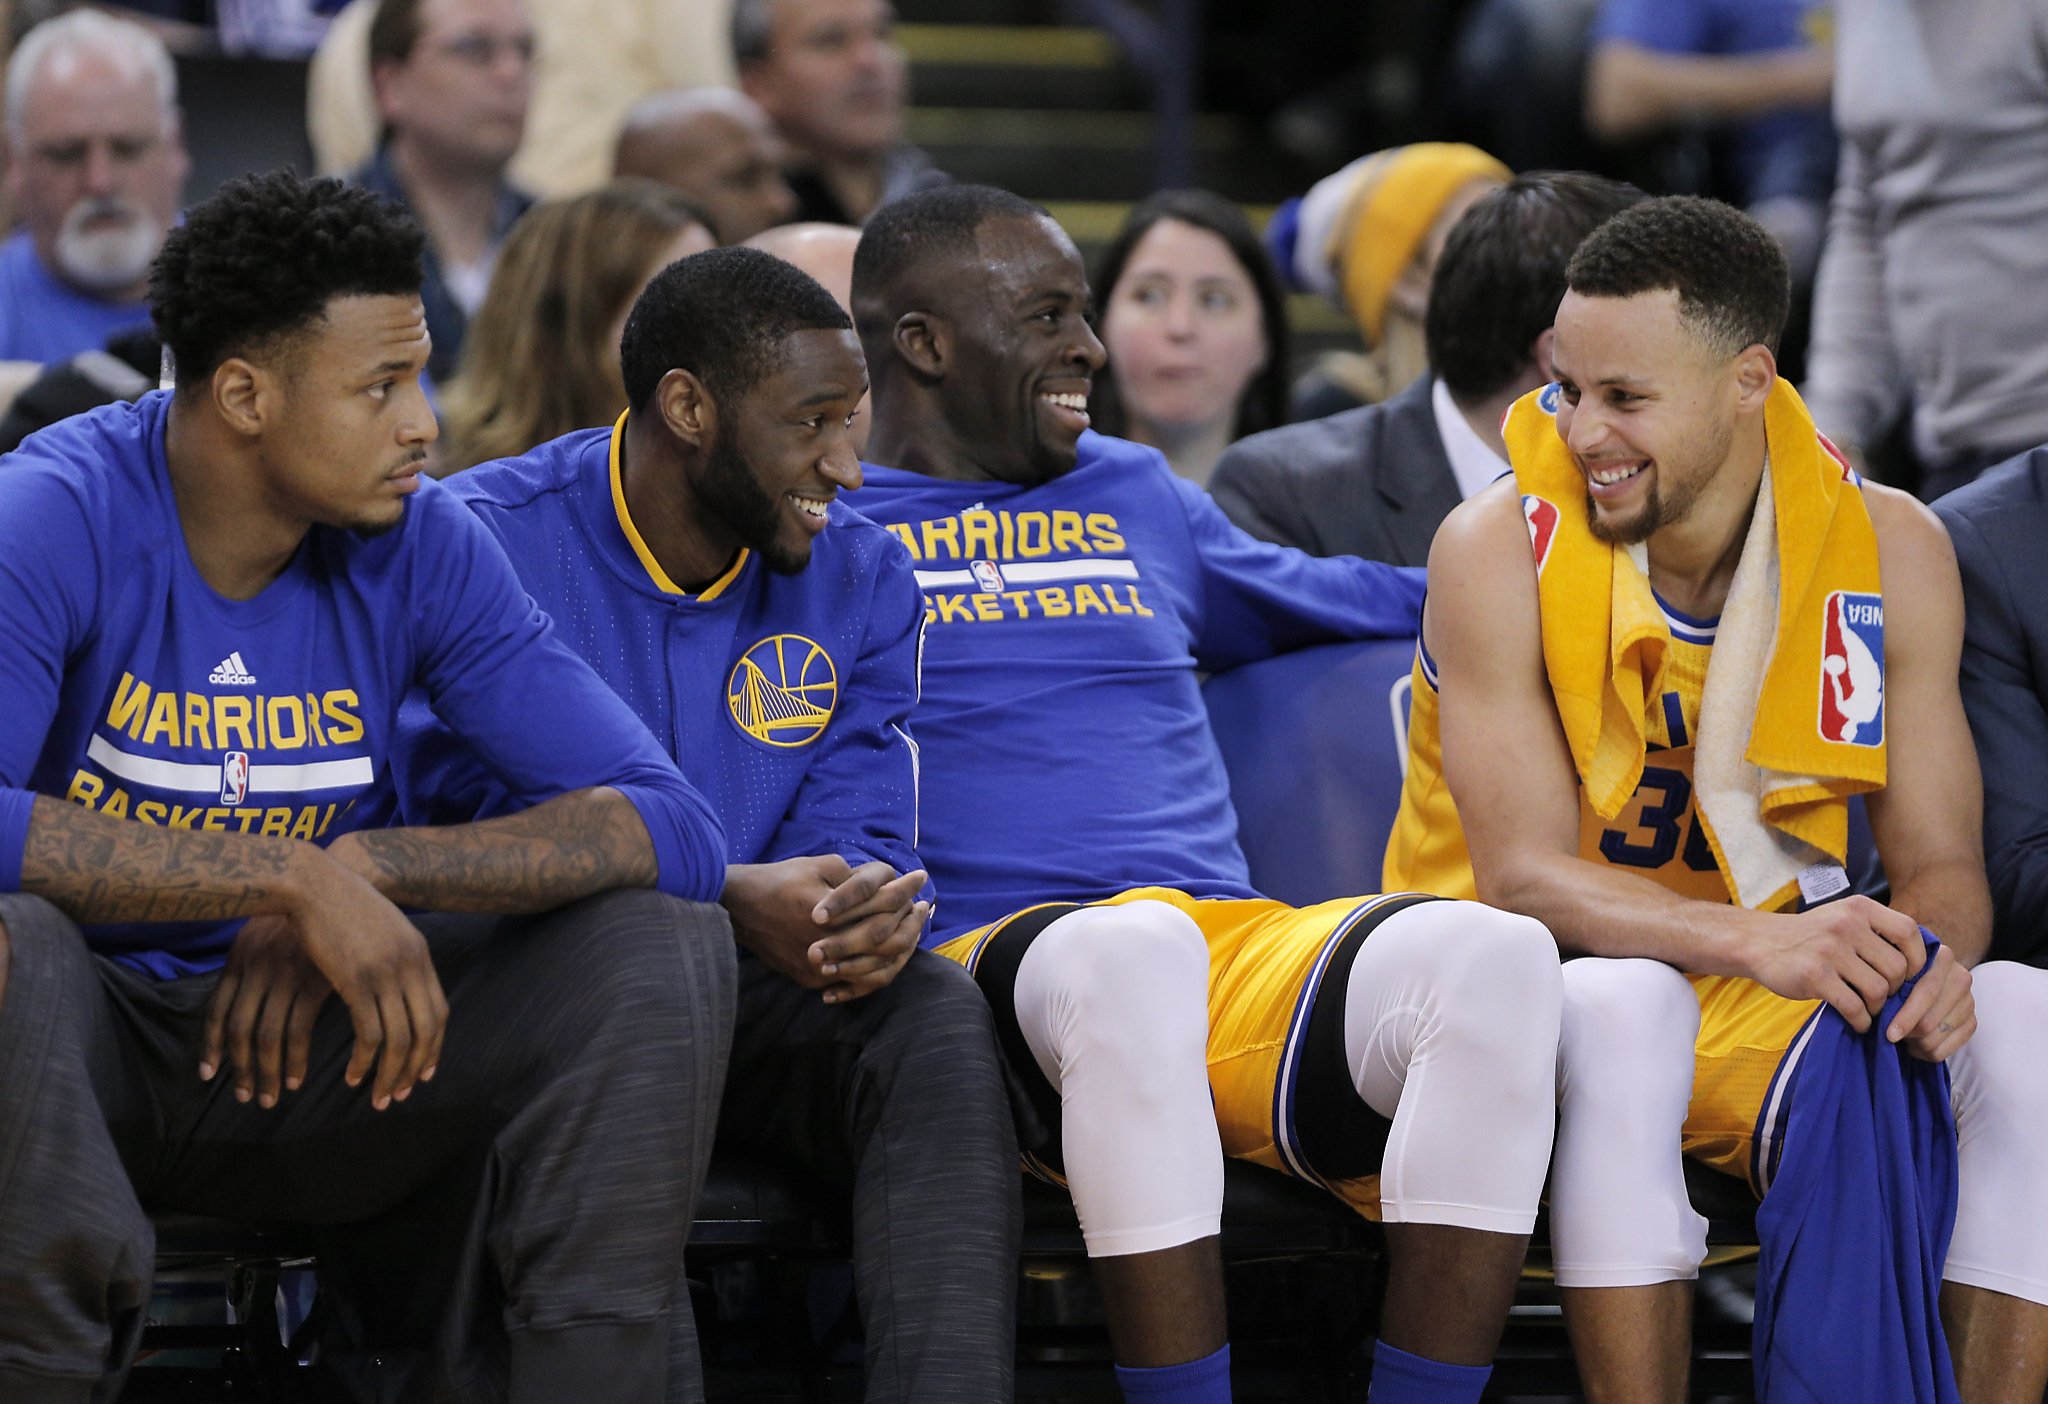 Warriors taking aim at NBA record of 33 straight wins - SFGate2048 x 1404